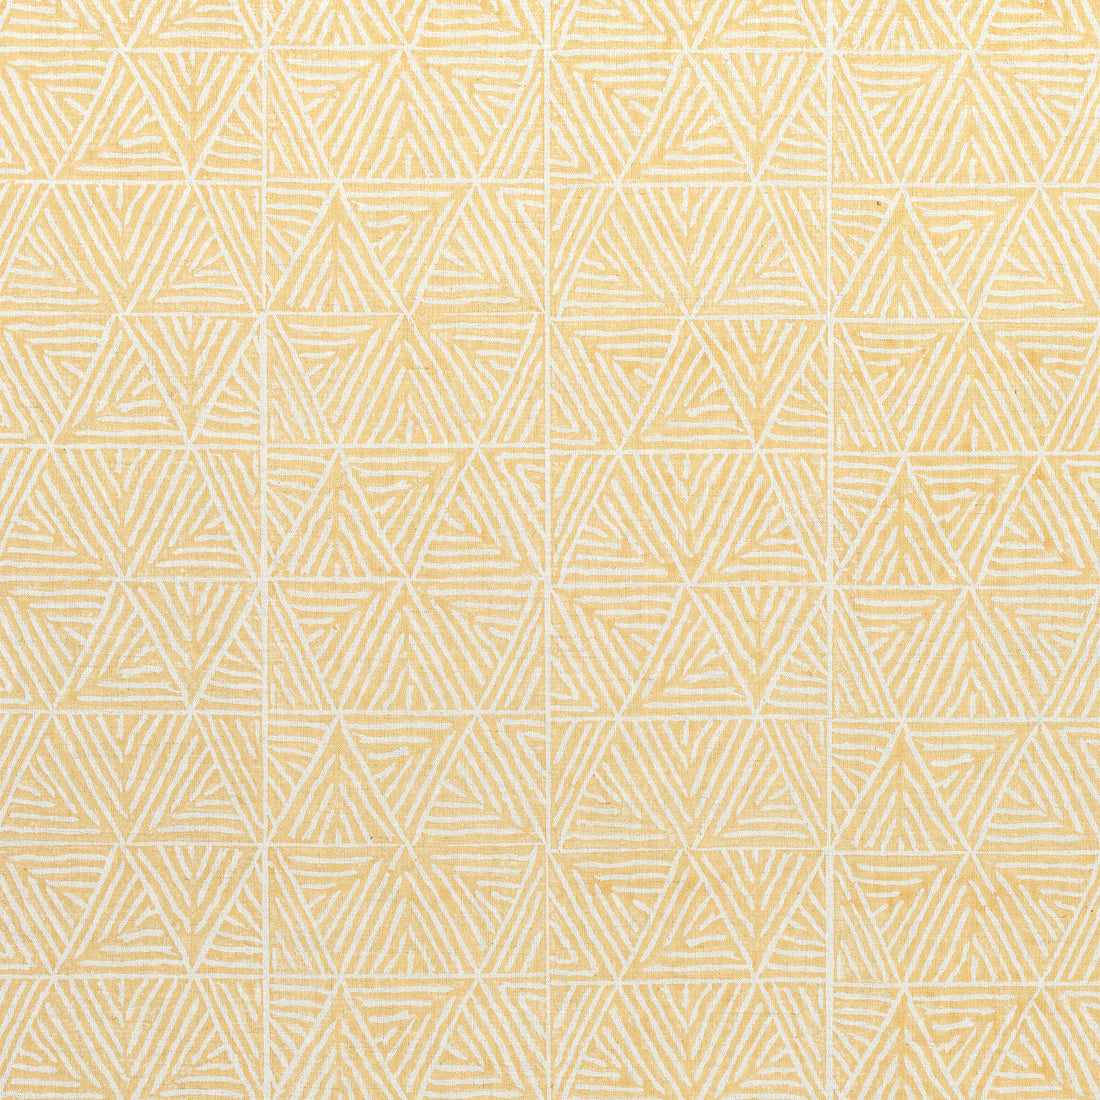 Mombasa fabric in wheat color - pattern number F910206 - by Thibaut in the Colony collection